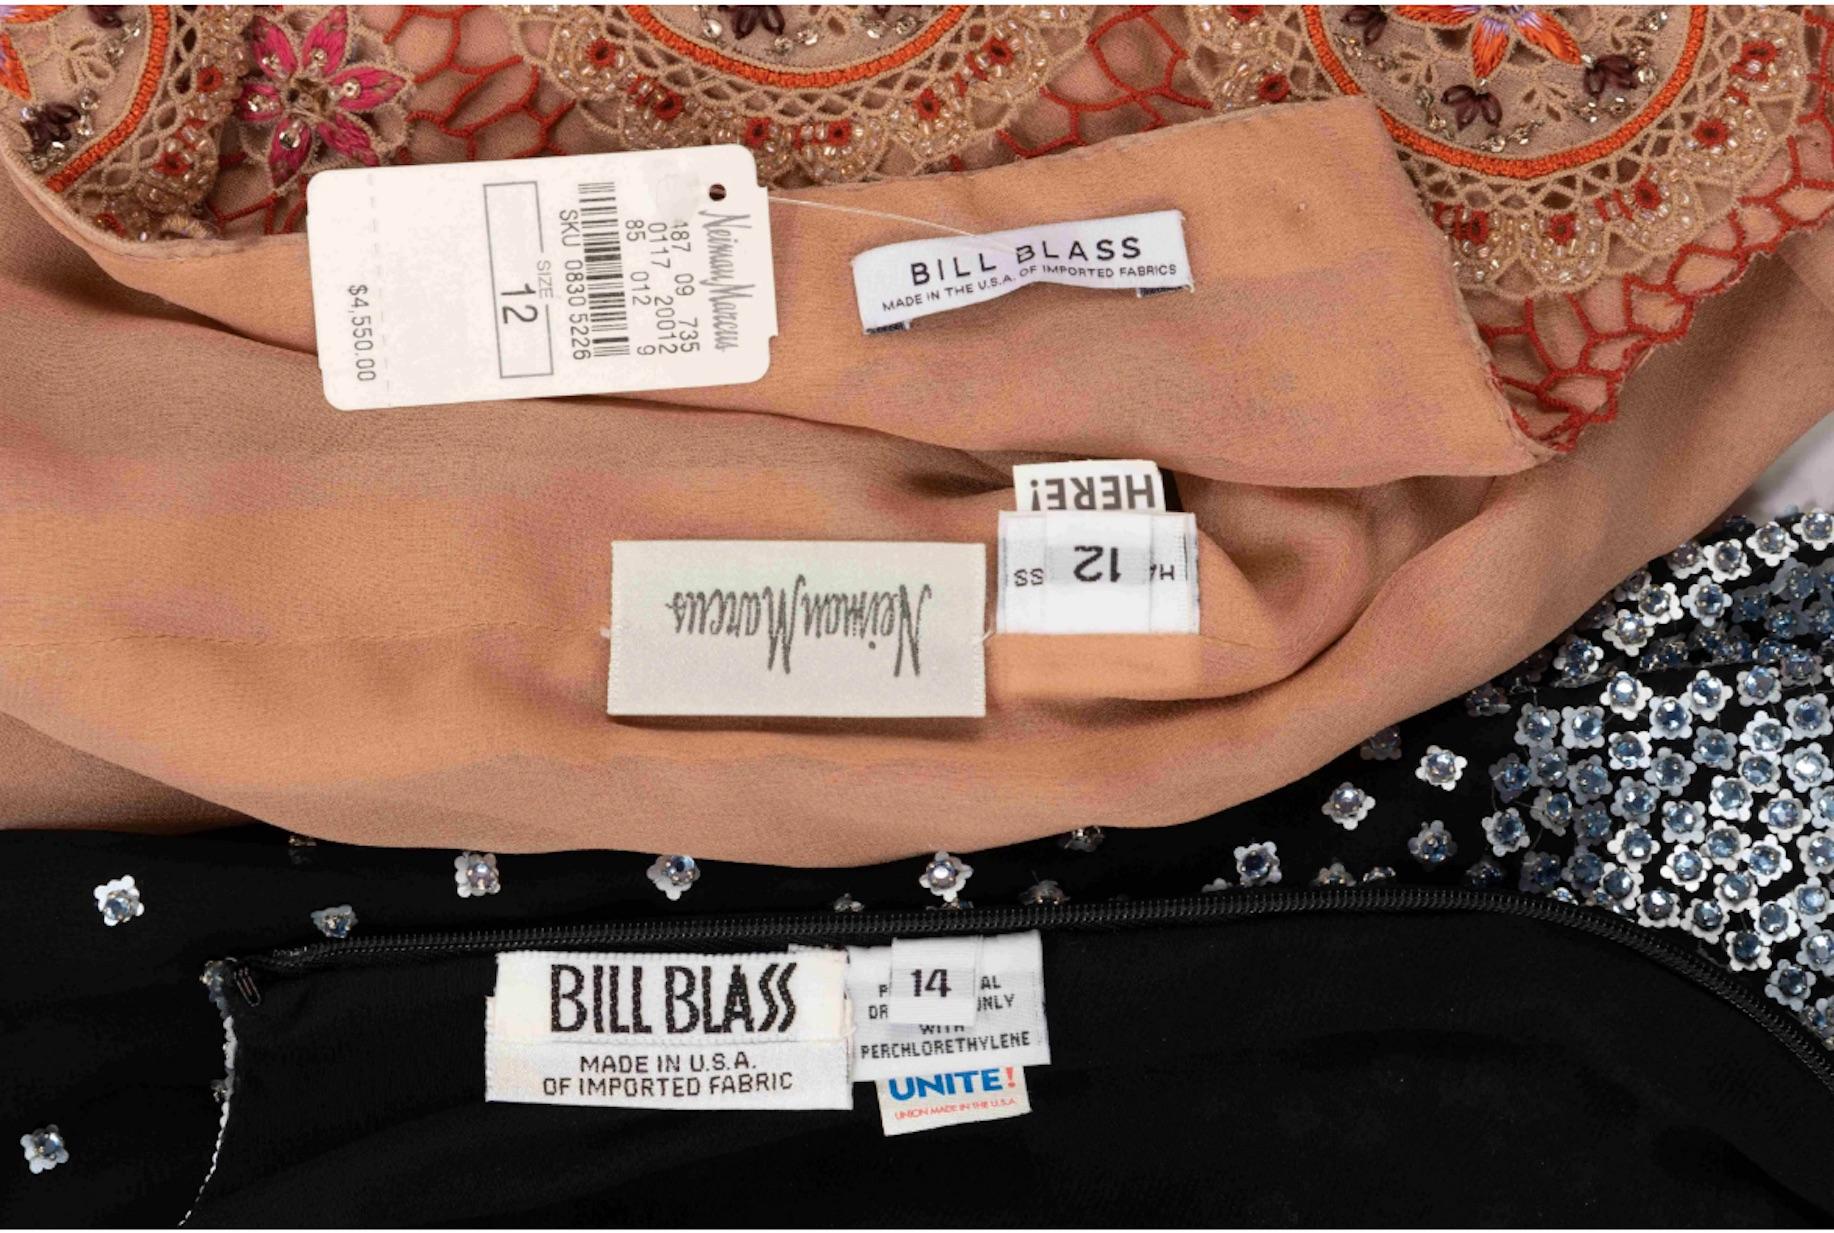 Brown Two Bill Blass Couture Beaded Tops.  New Still Retaining Their Original Pricetag For Sale